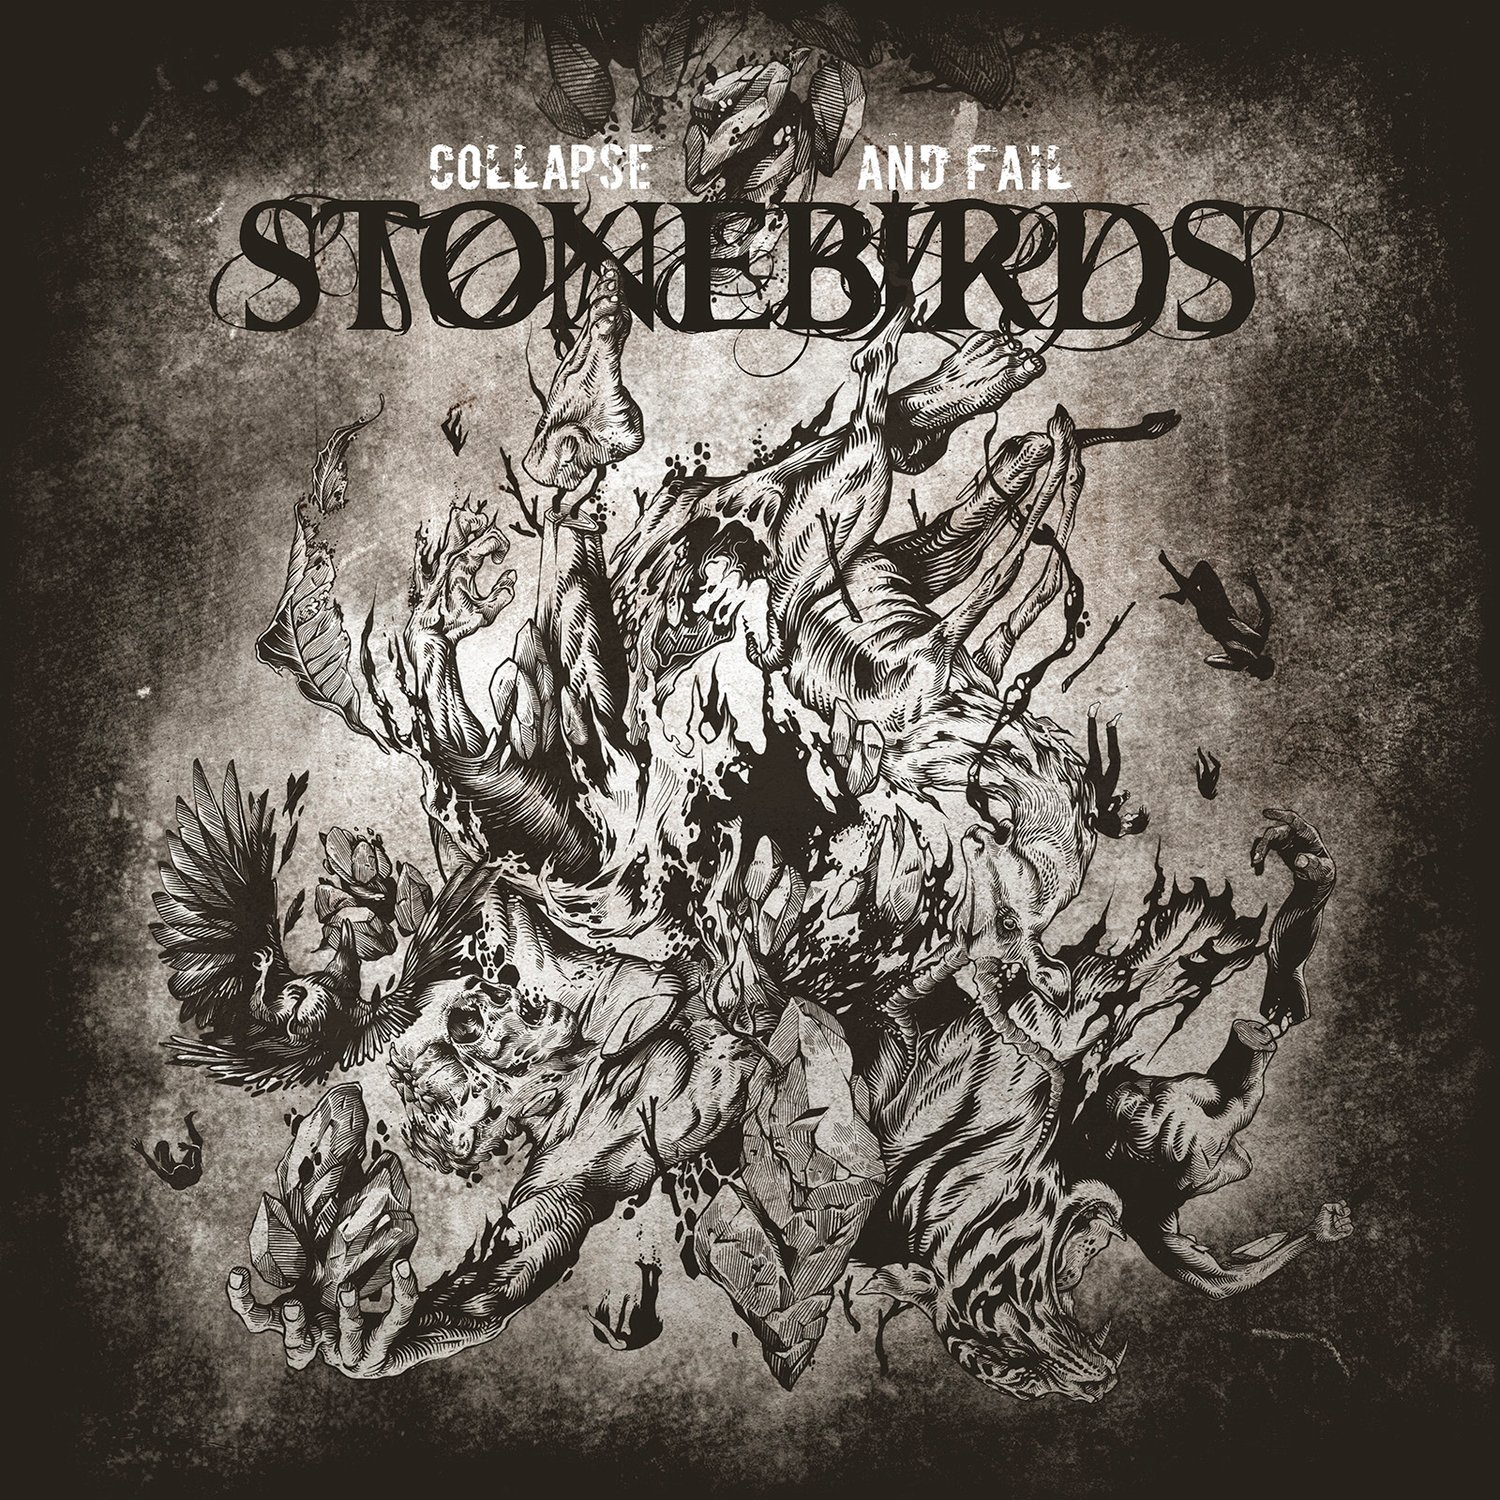 Image of Stonebirds - Collapse and Fail Limited Edition Digipak CD